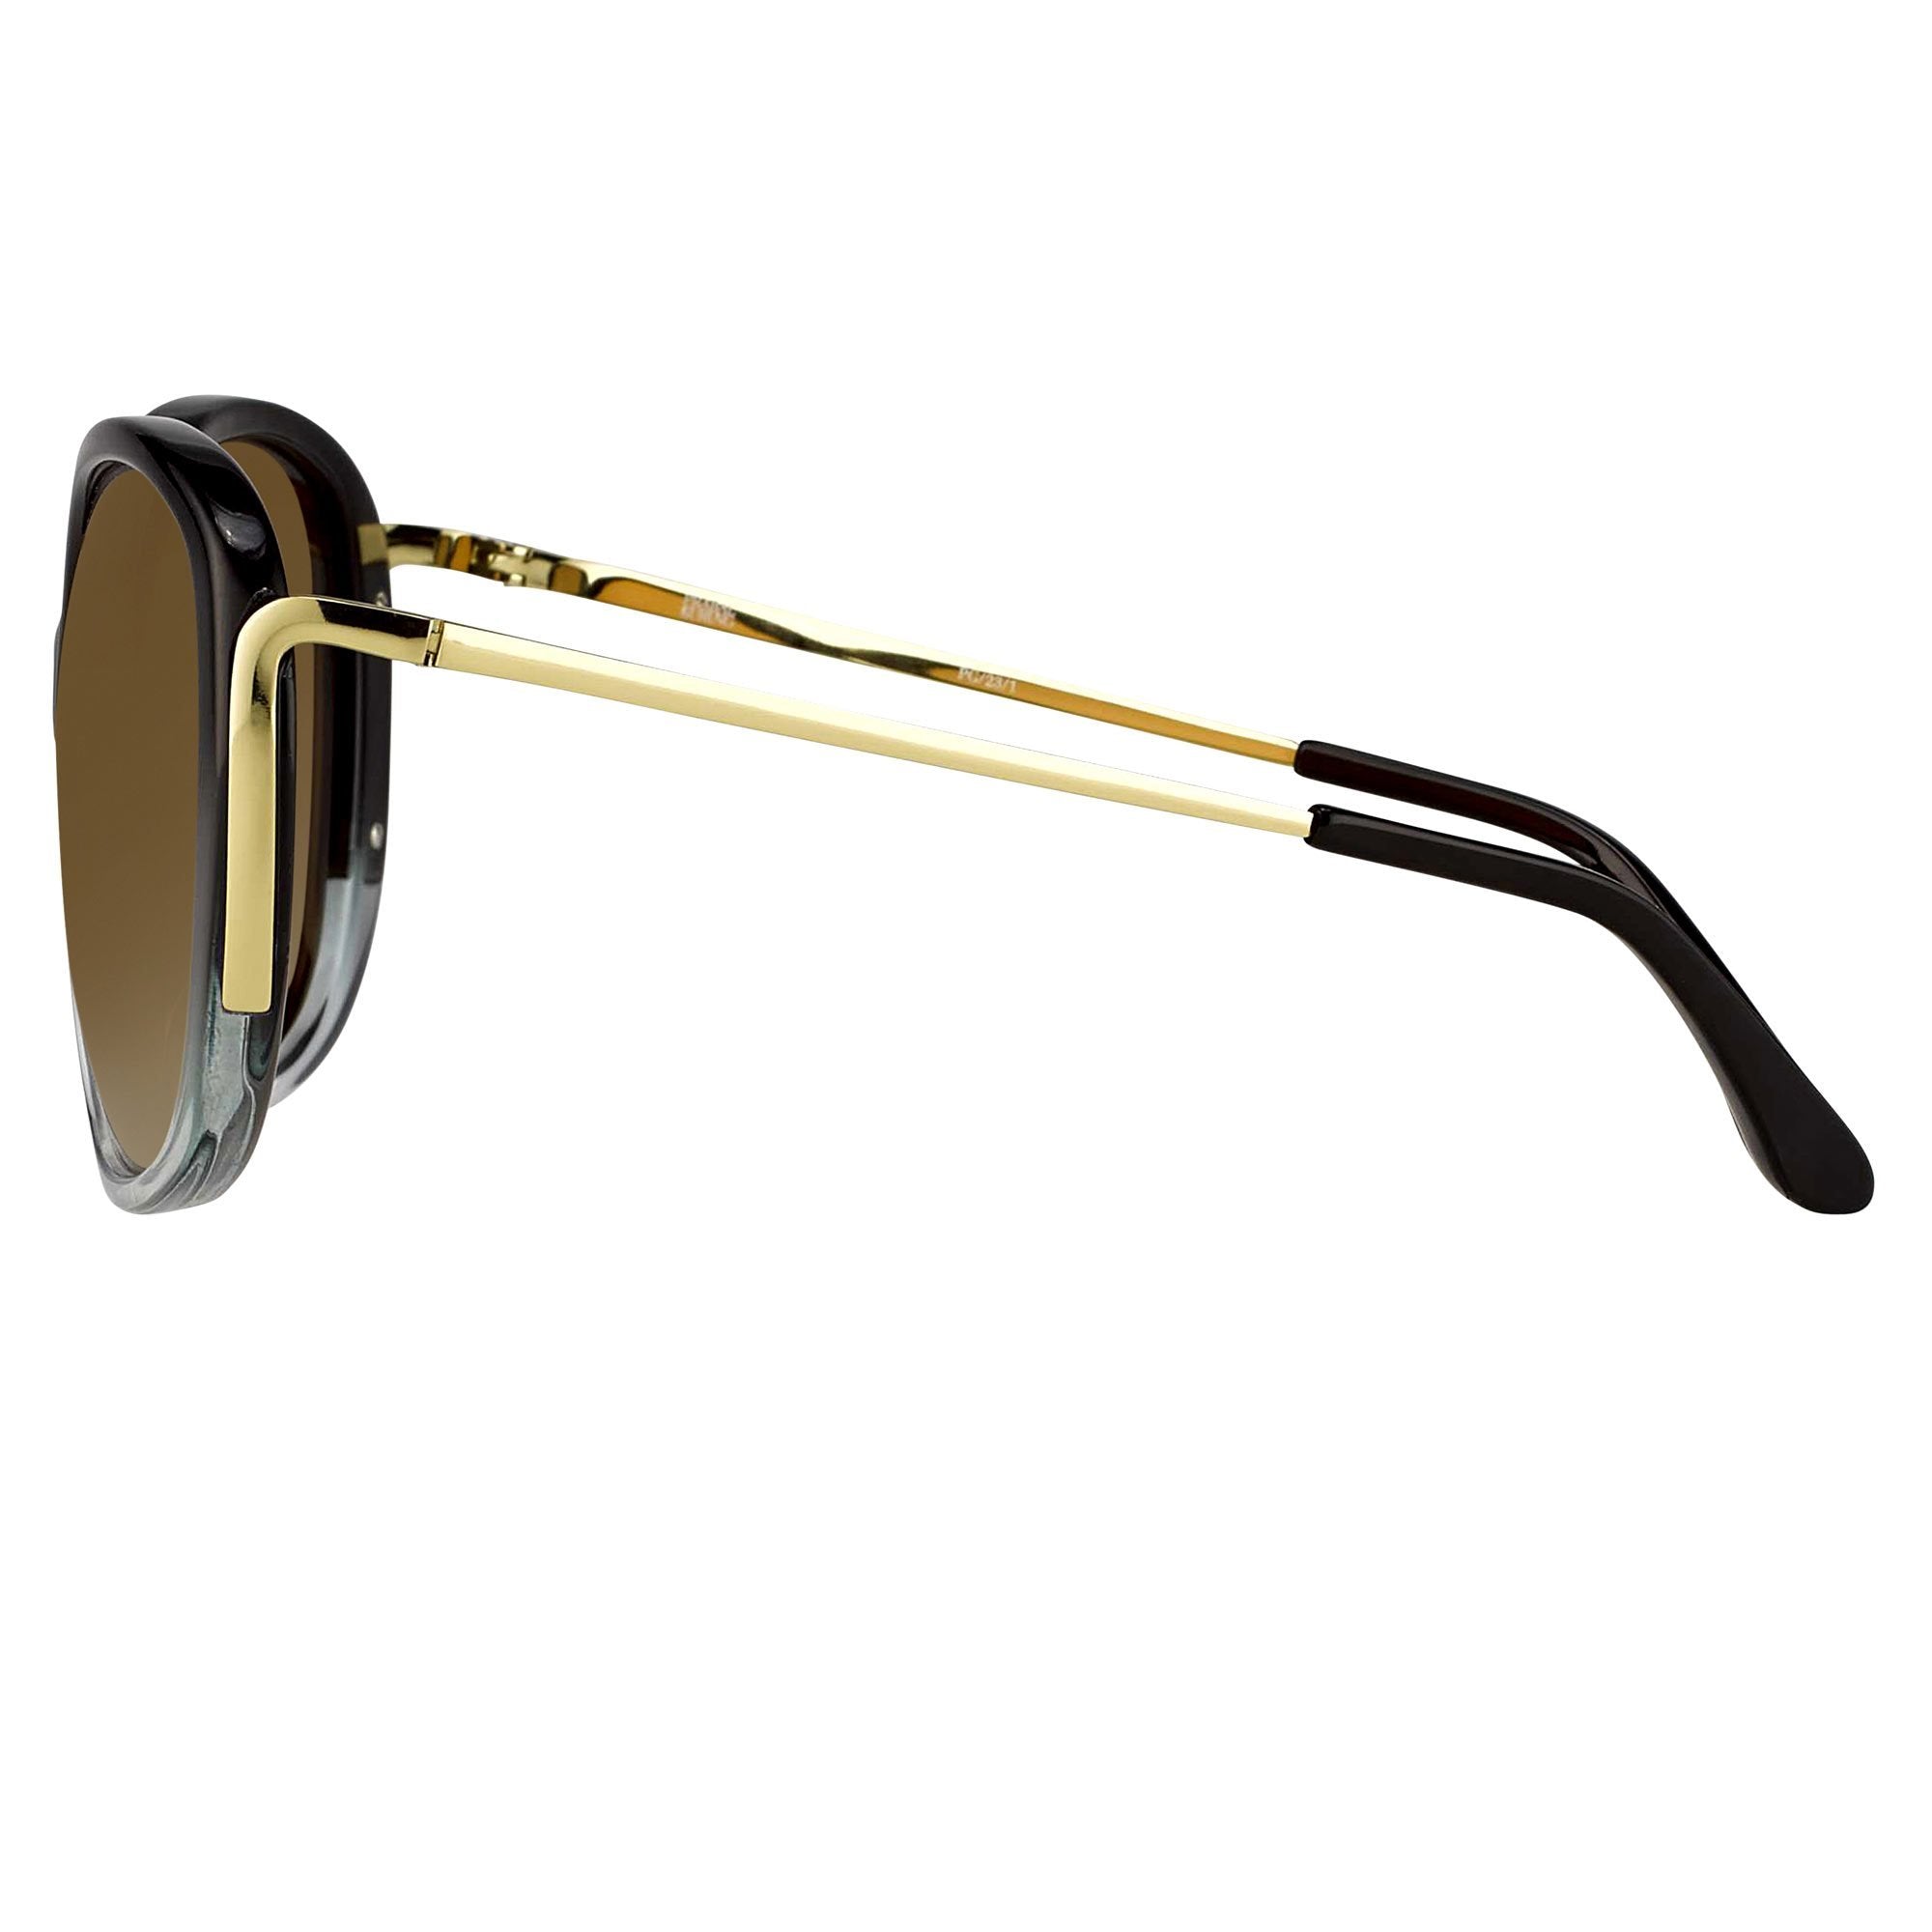 Prabal Gurung Sunglasses Oversized Female Black to Clear/Gold Frame Category 2 Gold Mirror Lenses PG23C1SUN - Watches & Crystals